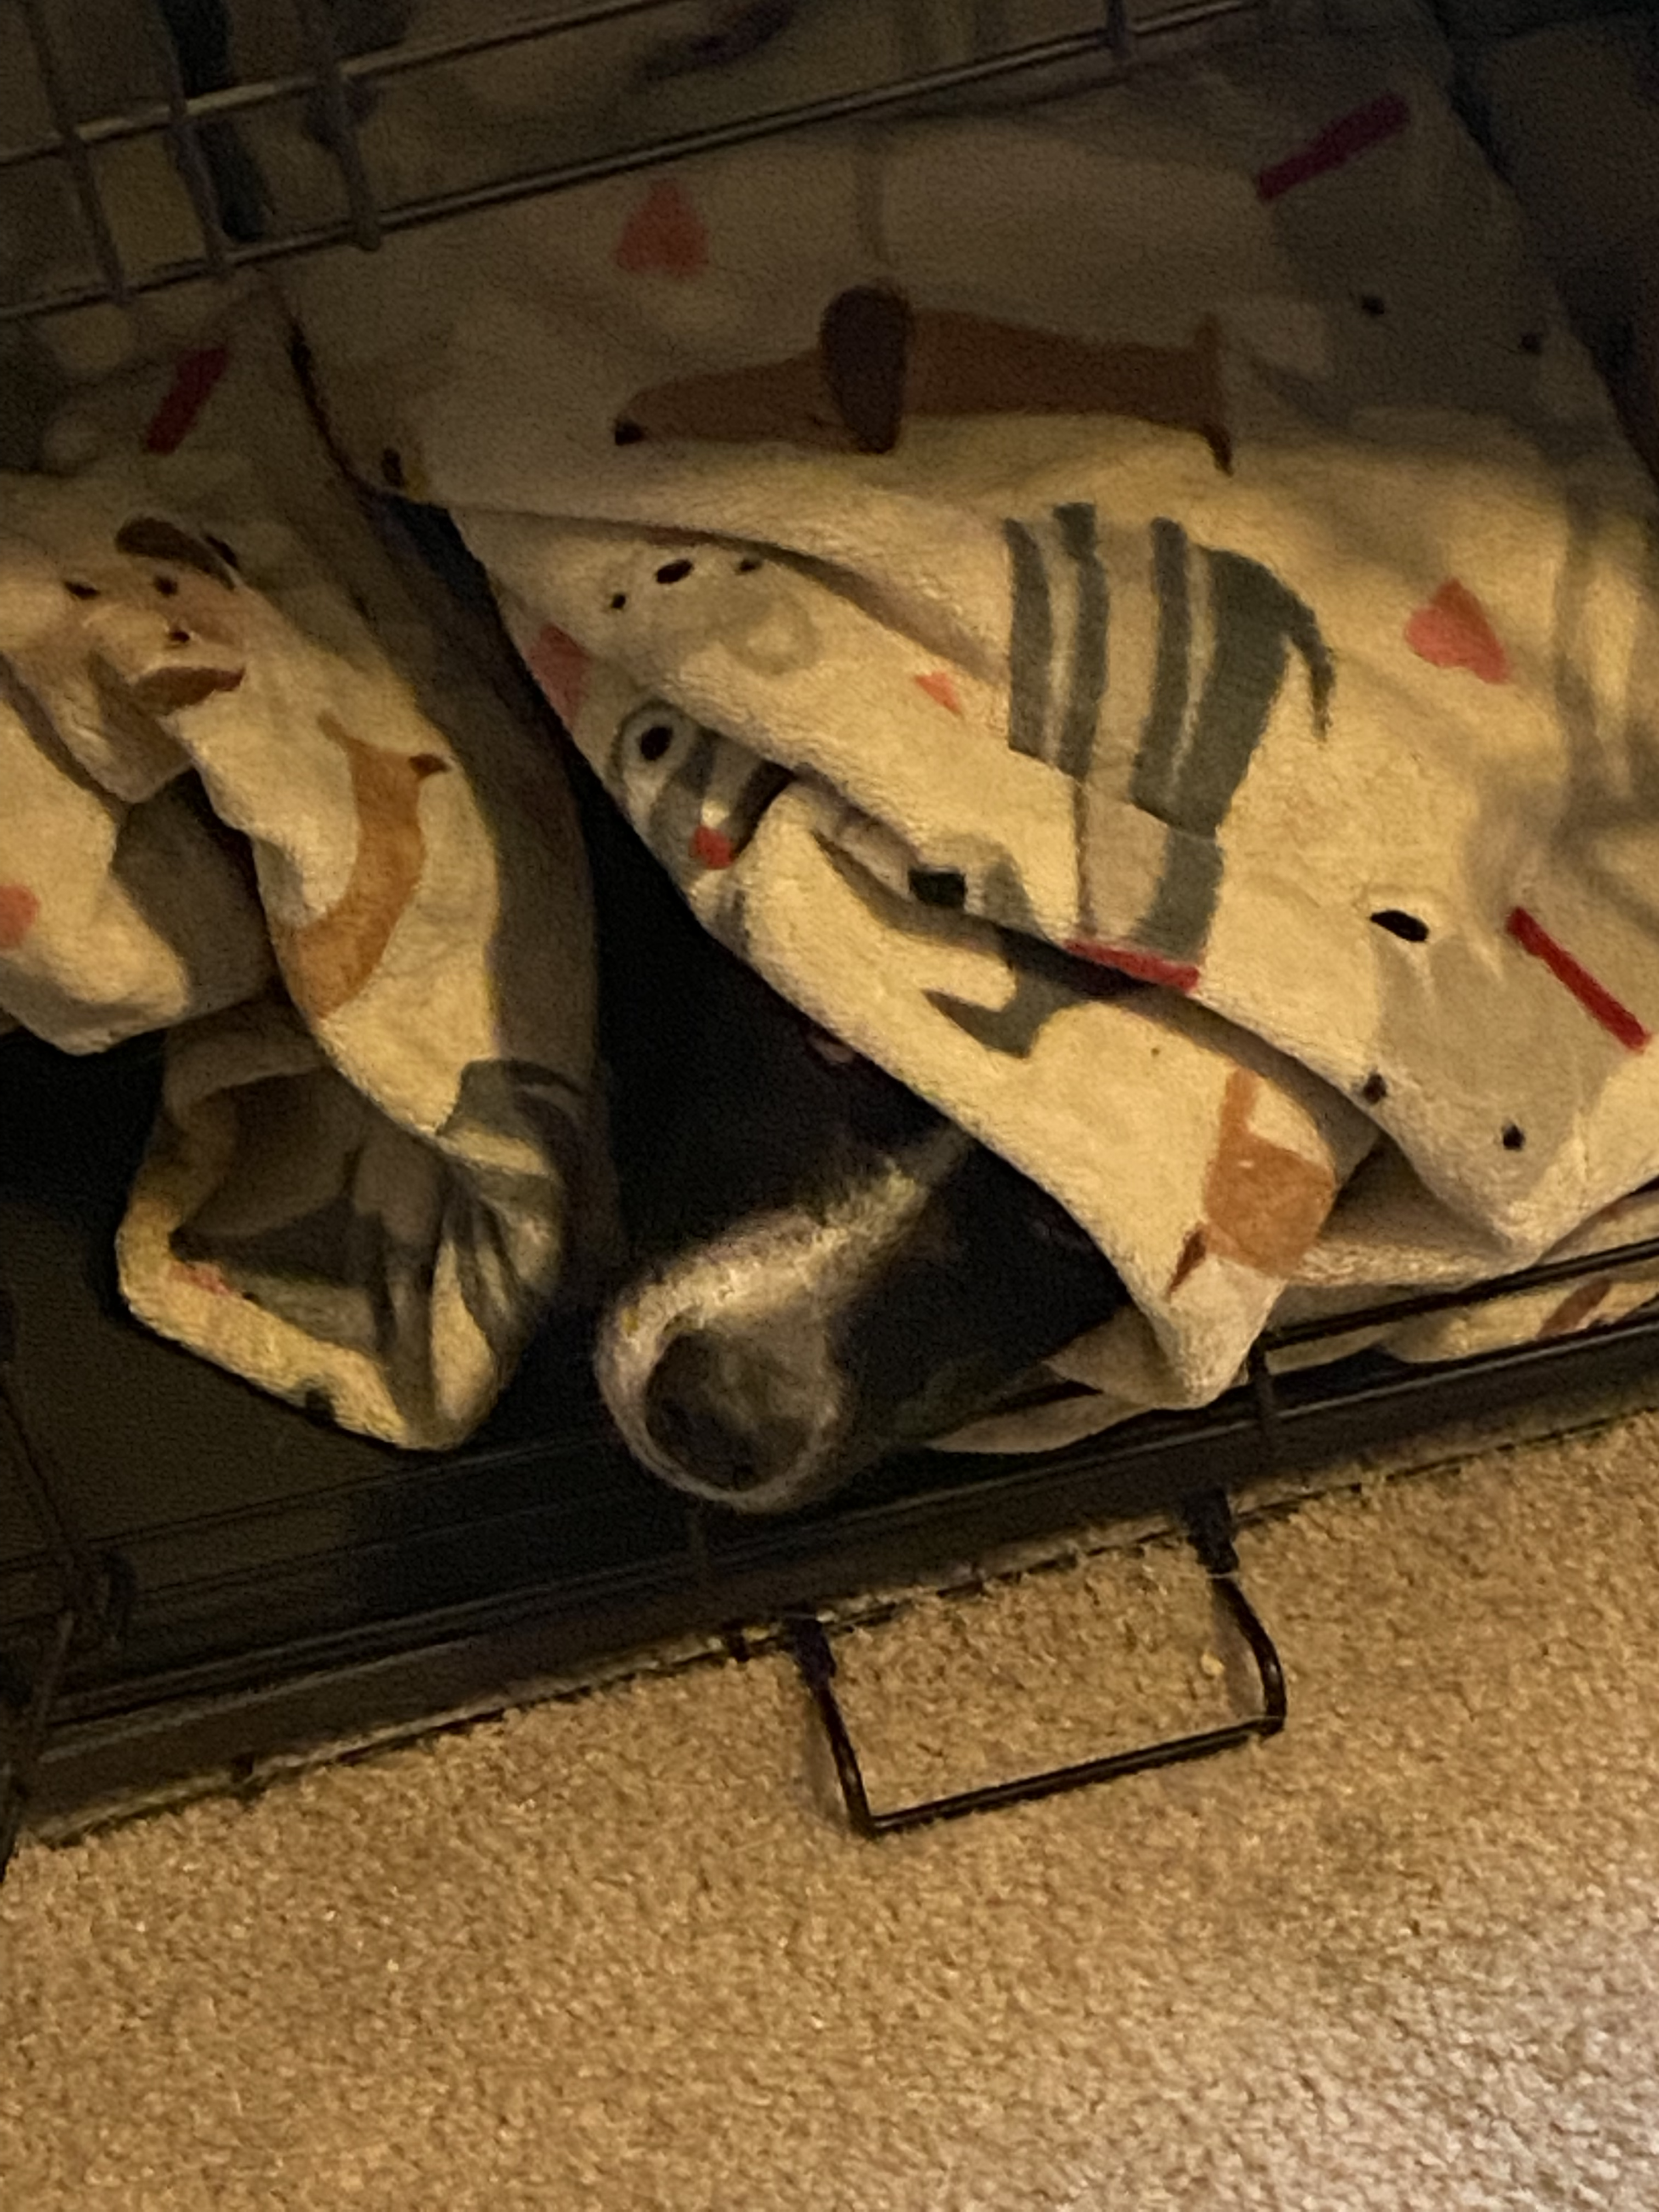 Dog lying under a blanket with only his nose sticking out